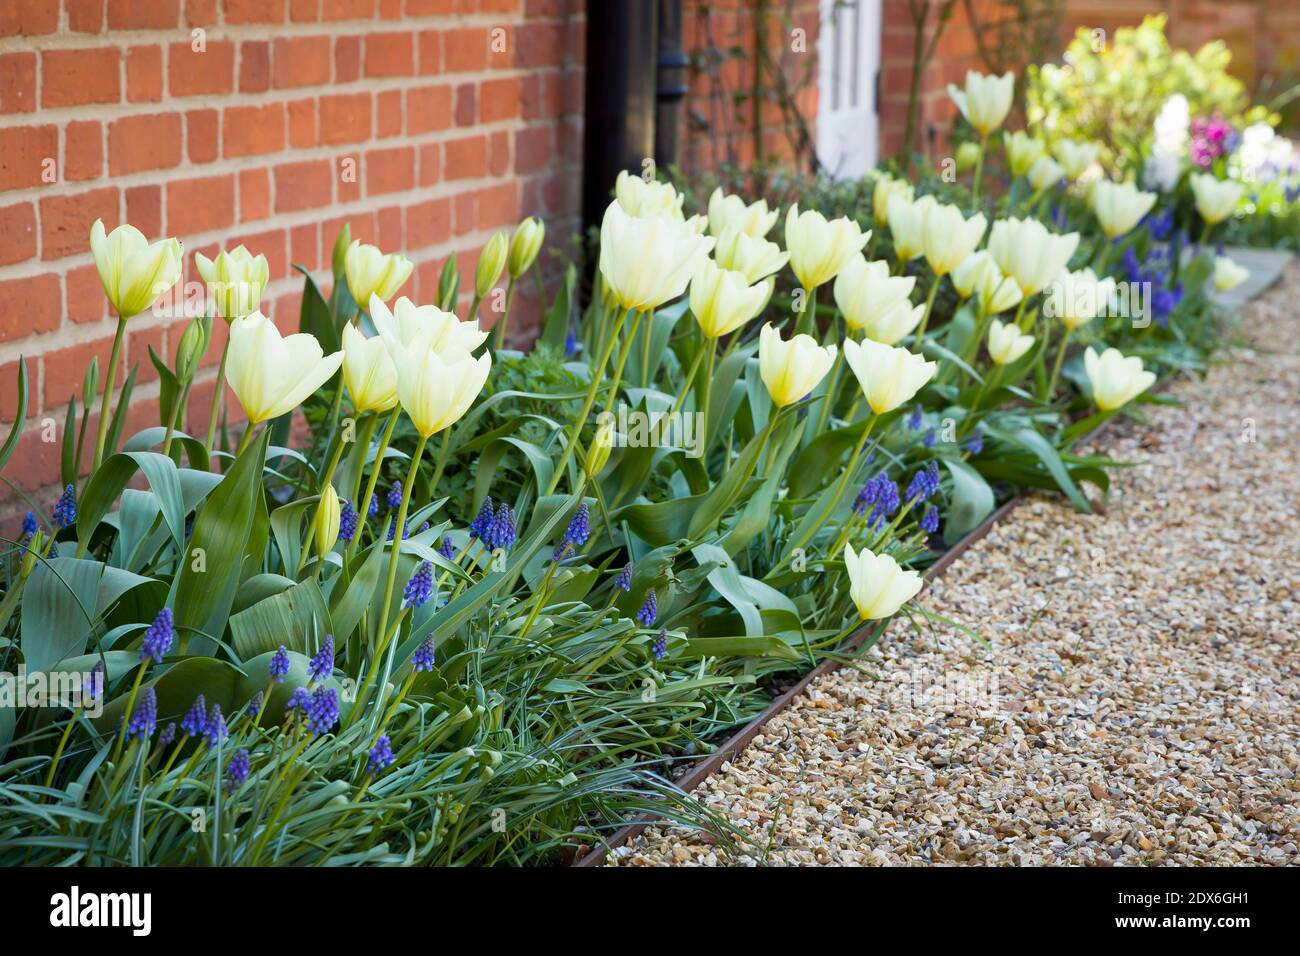 Tulips and muscari (grape hyacinth) growing in a garden flowerbed, spring flower bed, UK Stock Photo